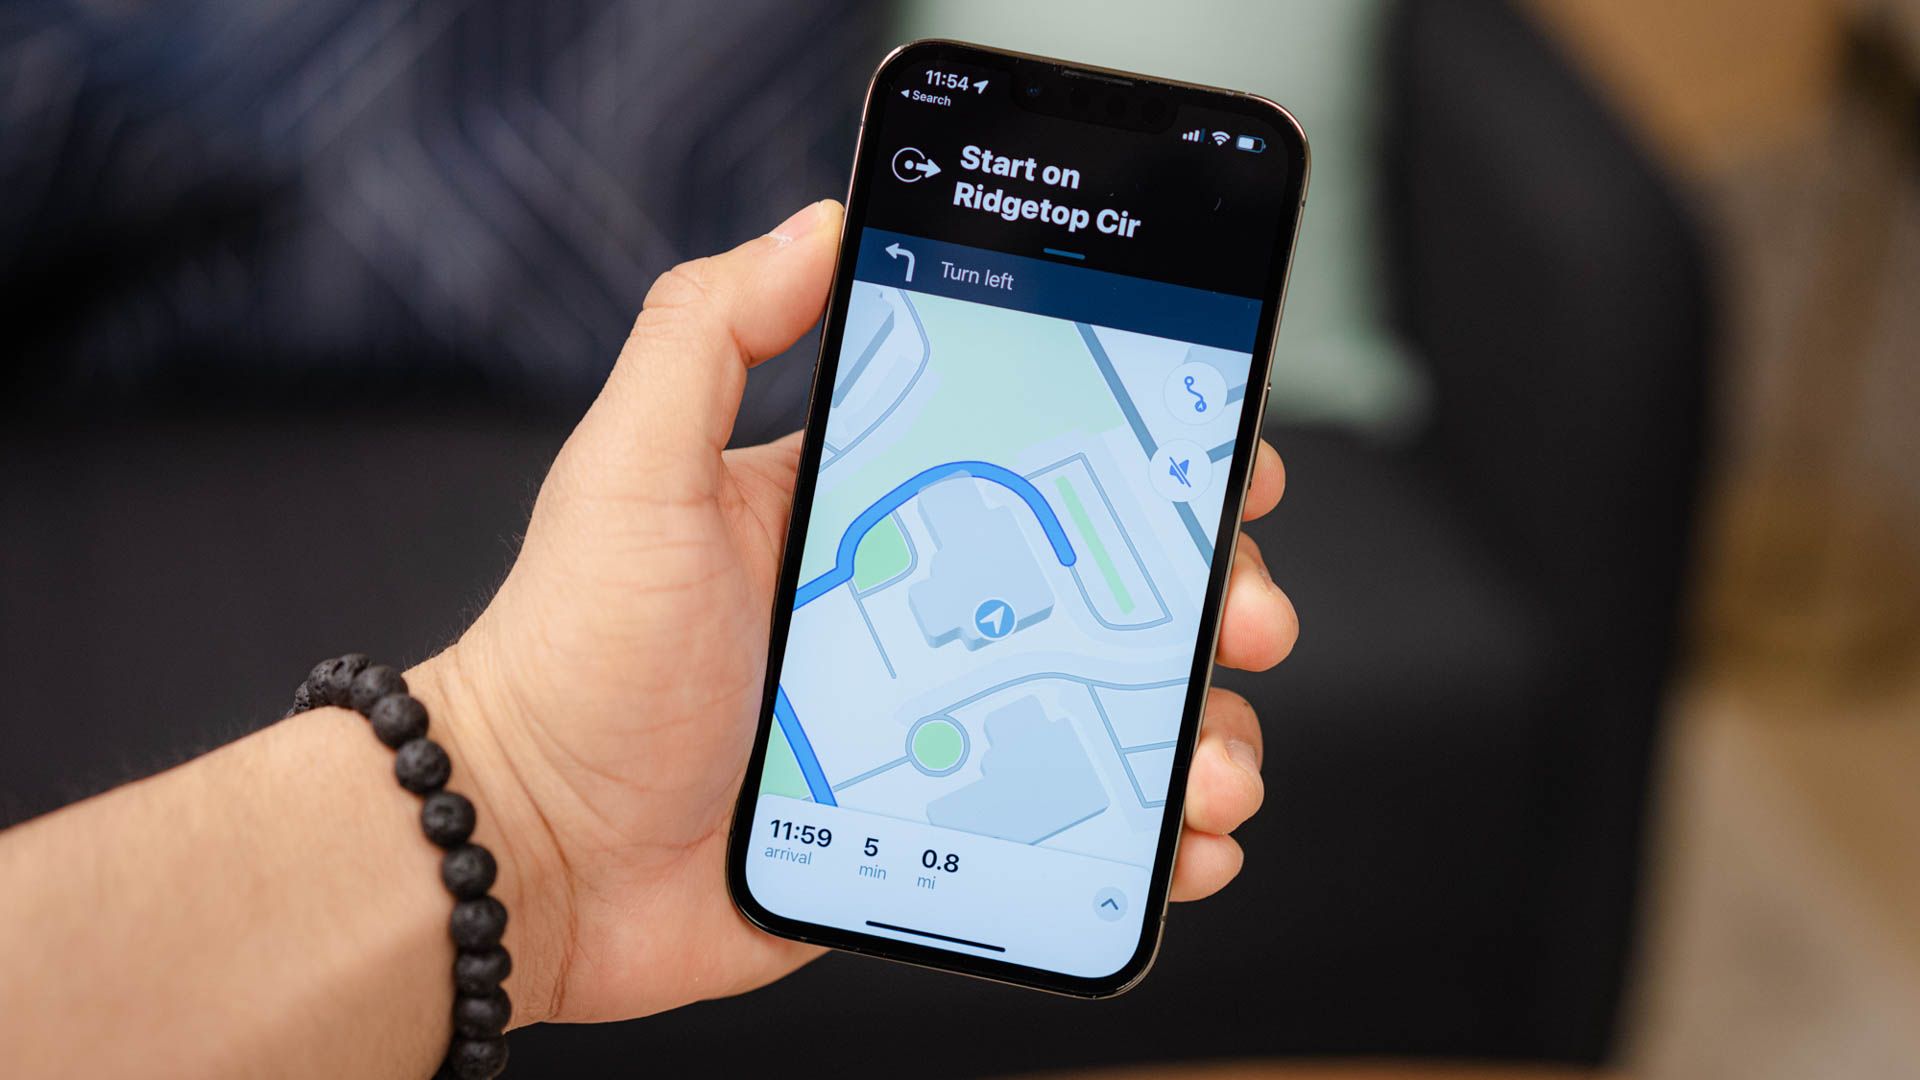 Apple Maps open on an iPhone showing directions